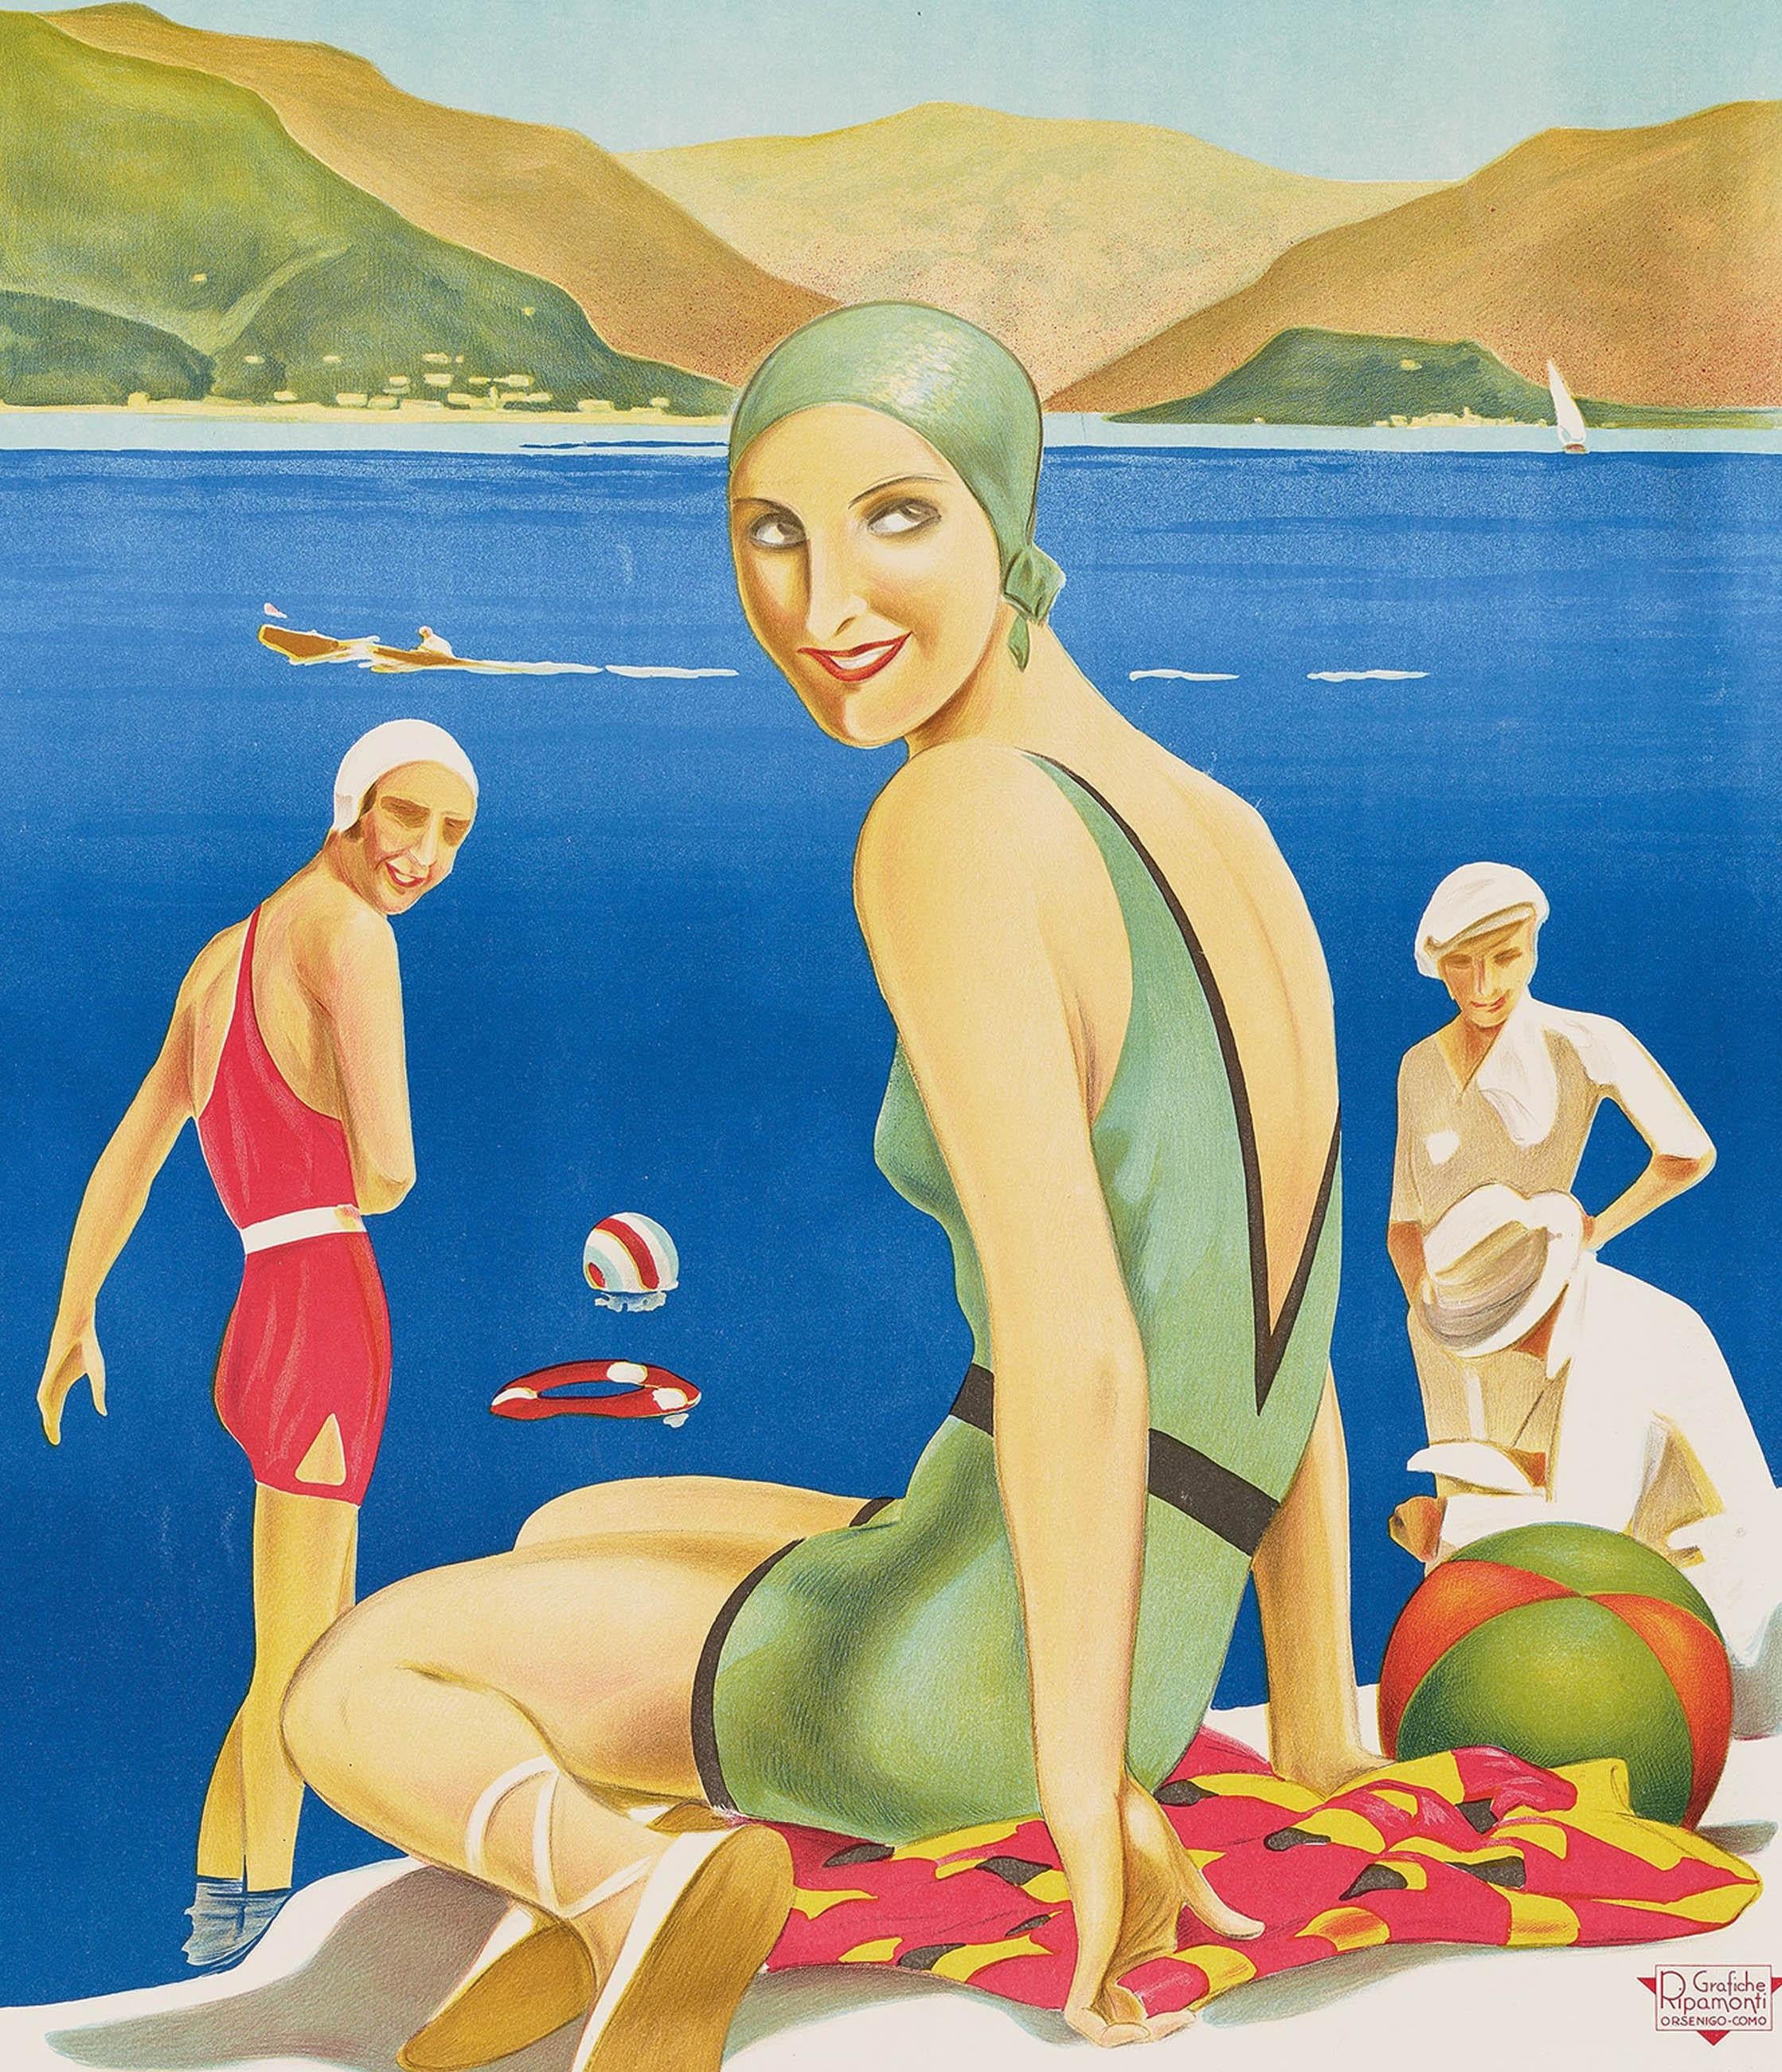 Original Vintage Travel Poster Lake Como Art Deco Bathers Comersee Italy Italien - Print by Unknown